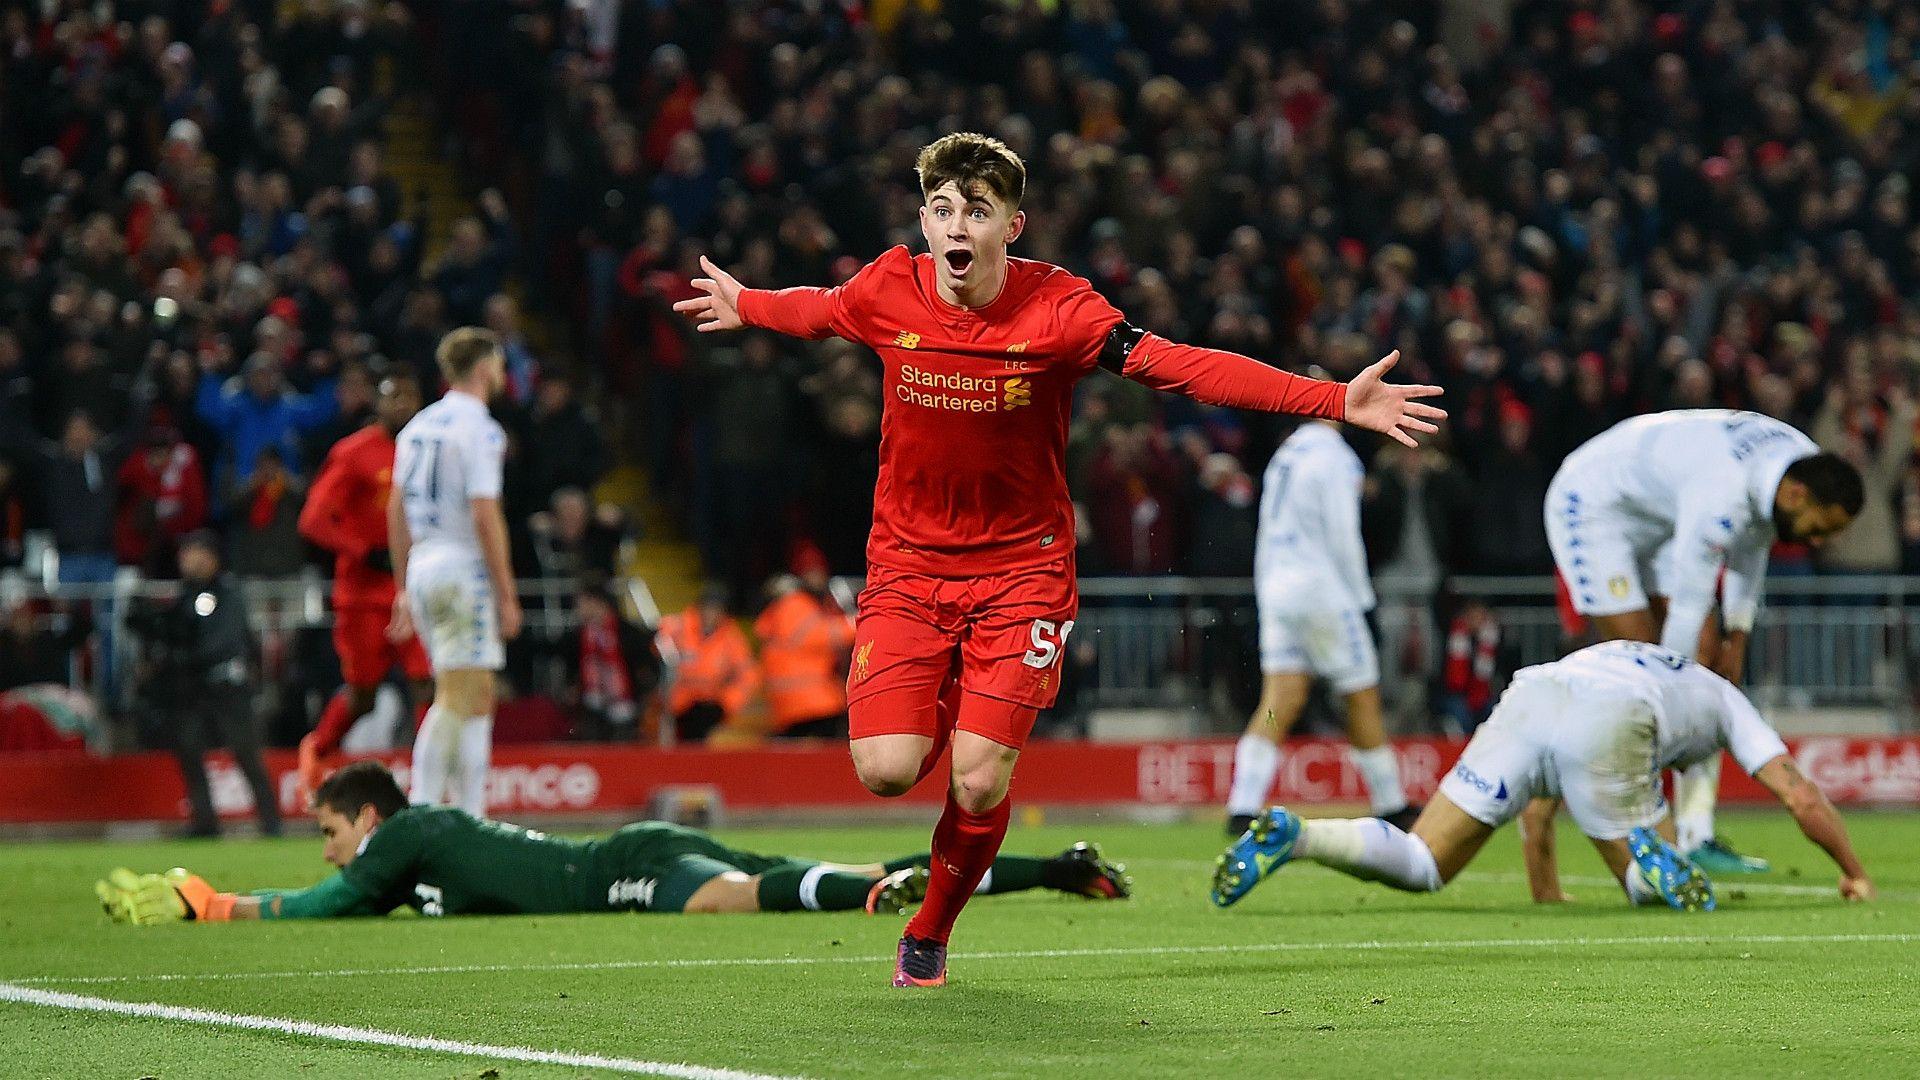 Opinion: Is Ben Woodburn worth the risk? Of The Town